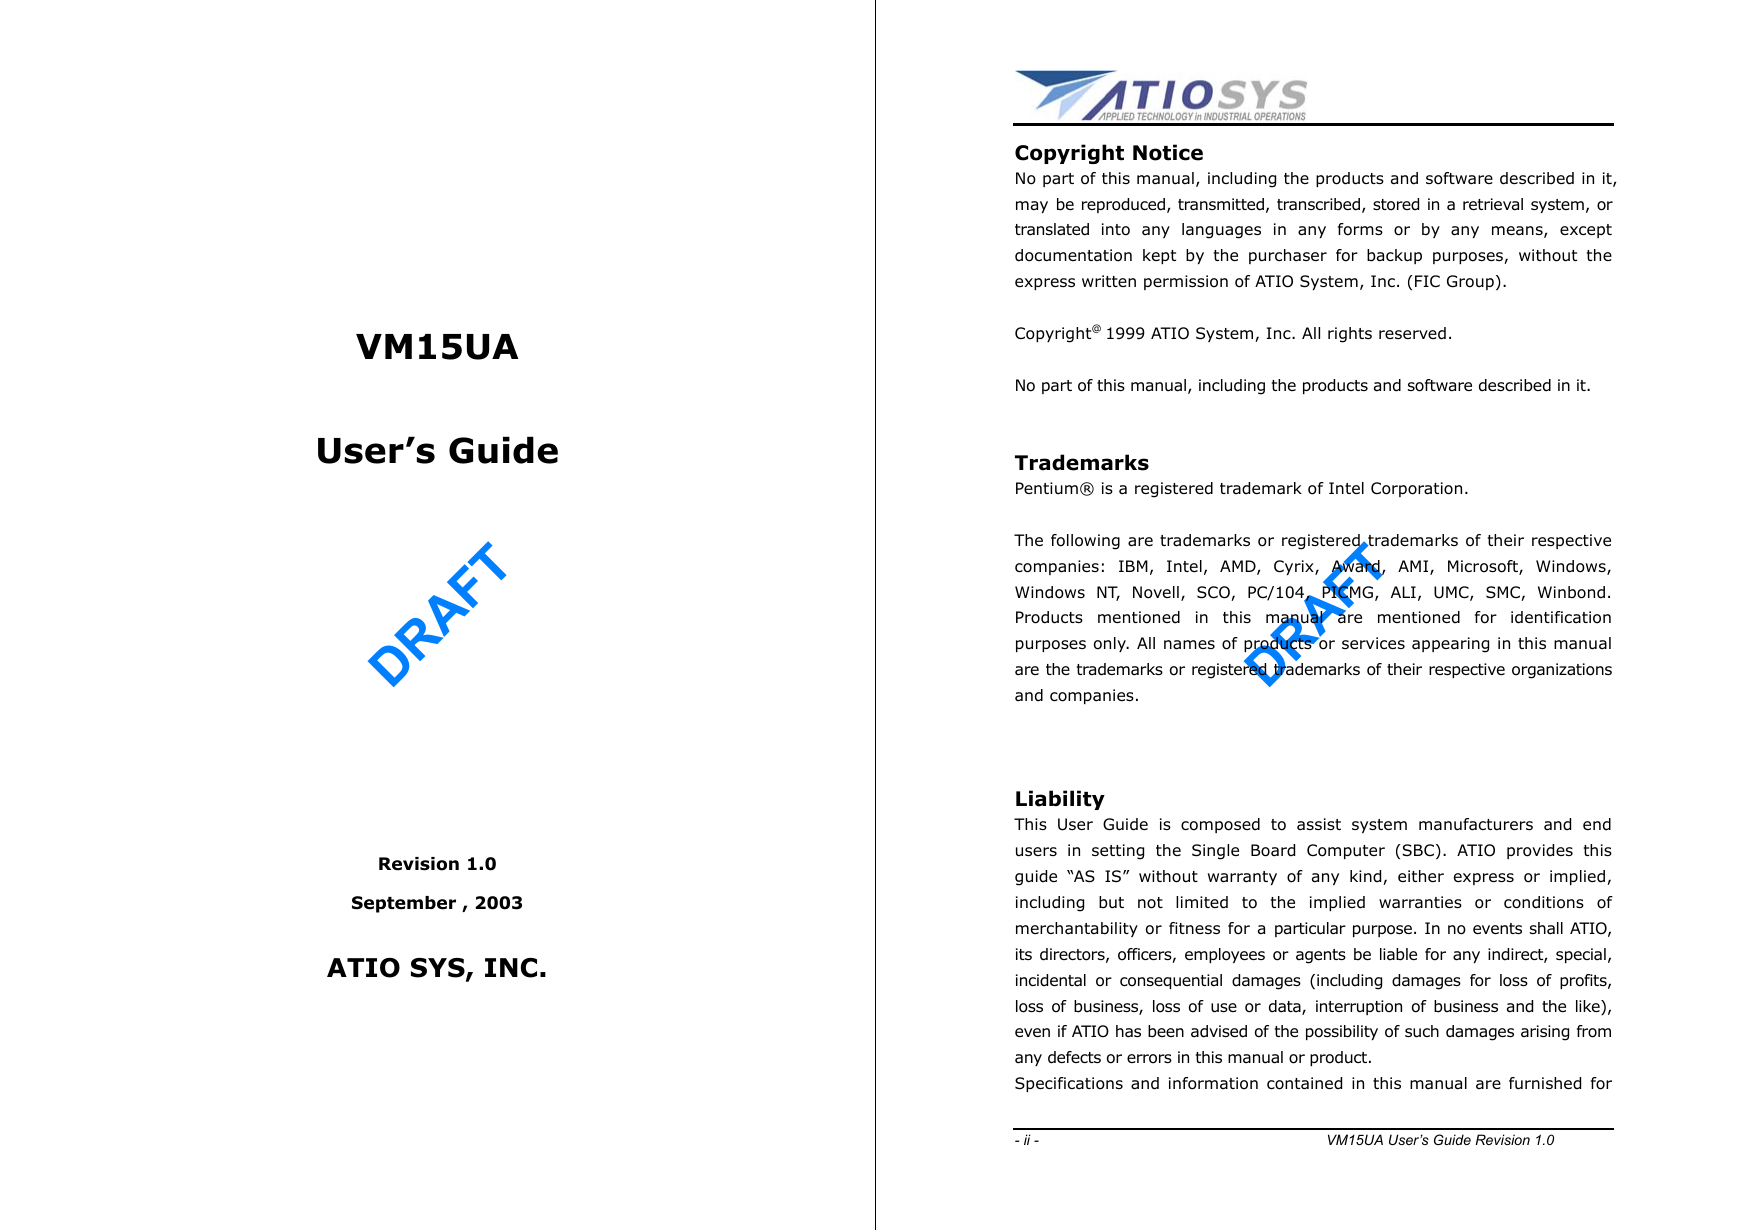 DRAFT        VM15UA   User’s Guide        Revision 1.0 September , 2003  ATIO SYS, INC.     DRAFT - ii -                                        VM15UA User’s Guide Revision 1.0  Copyright Notice No part of this manual, including the products and software described in it, may be reproduced, transmitted, transcribed, stored in a retrieval system, or translated into any languages in any forms or by any means, except documentation kept by the purchaser for backup purposes, without the express written permission of ATIO System, Inc. (FIC Group).  Copyright@ 1999 ATIO System, Inc. All rights reserved.  No part of this manual, including the products and software described in it.   Trademarks Pentium® is a registered trademark of Intel Corporation.  The following are trademarks or registered trademarks of their respective companies: IBM, Intel, AMD, Cyrix, Award, AMI, Microsoft, Windows, Windows NT, Novell, SCO, PC/104, PICMG, ALI, UMC, SMC, Winbond. Products mentioned in this manual are mentioned for identification purposes only. All names of products or services appearing in this manual are the trademarks or registered trademarks of their respective organizations and companies.      Liability This User Guide is composed to assist system manufacturers and end users in setting the Single Board Computer (SBC). ATIO provides this guide “AS IS” without warranty of any kind, either express or implied, including but not limited to the implied warranties or conditions of merchantability or fitness for a particular purpose. In no events shall ATIO, its directors, officers, employees or agents be liable for any indirect, special, incidental or consequential damages (including damages for loss of profits, loss of business, loss of use or data, interruption of business and the like), even if ATIO has been advised of the possibility of such damages arising from any defects or errors in this manual or product. Specifications and information contained in this manual are furnished for 